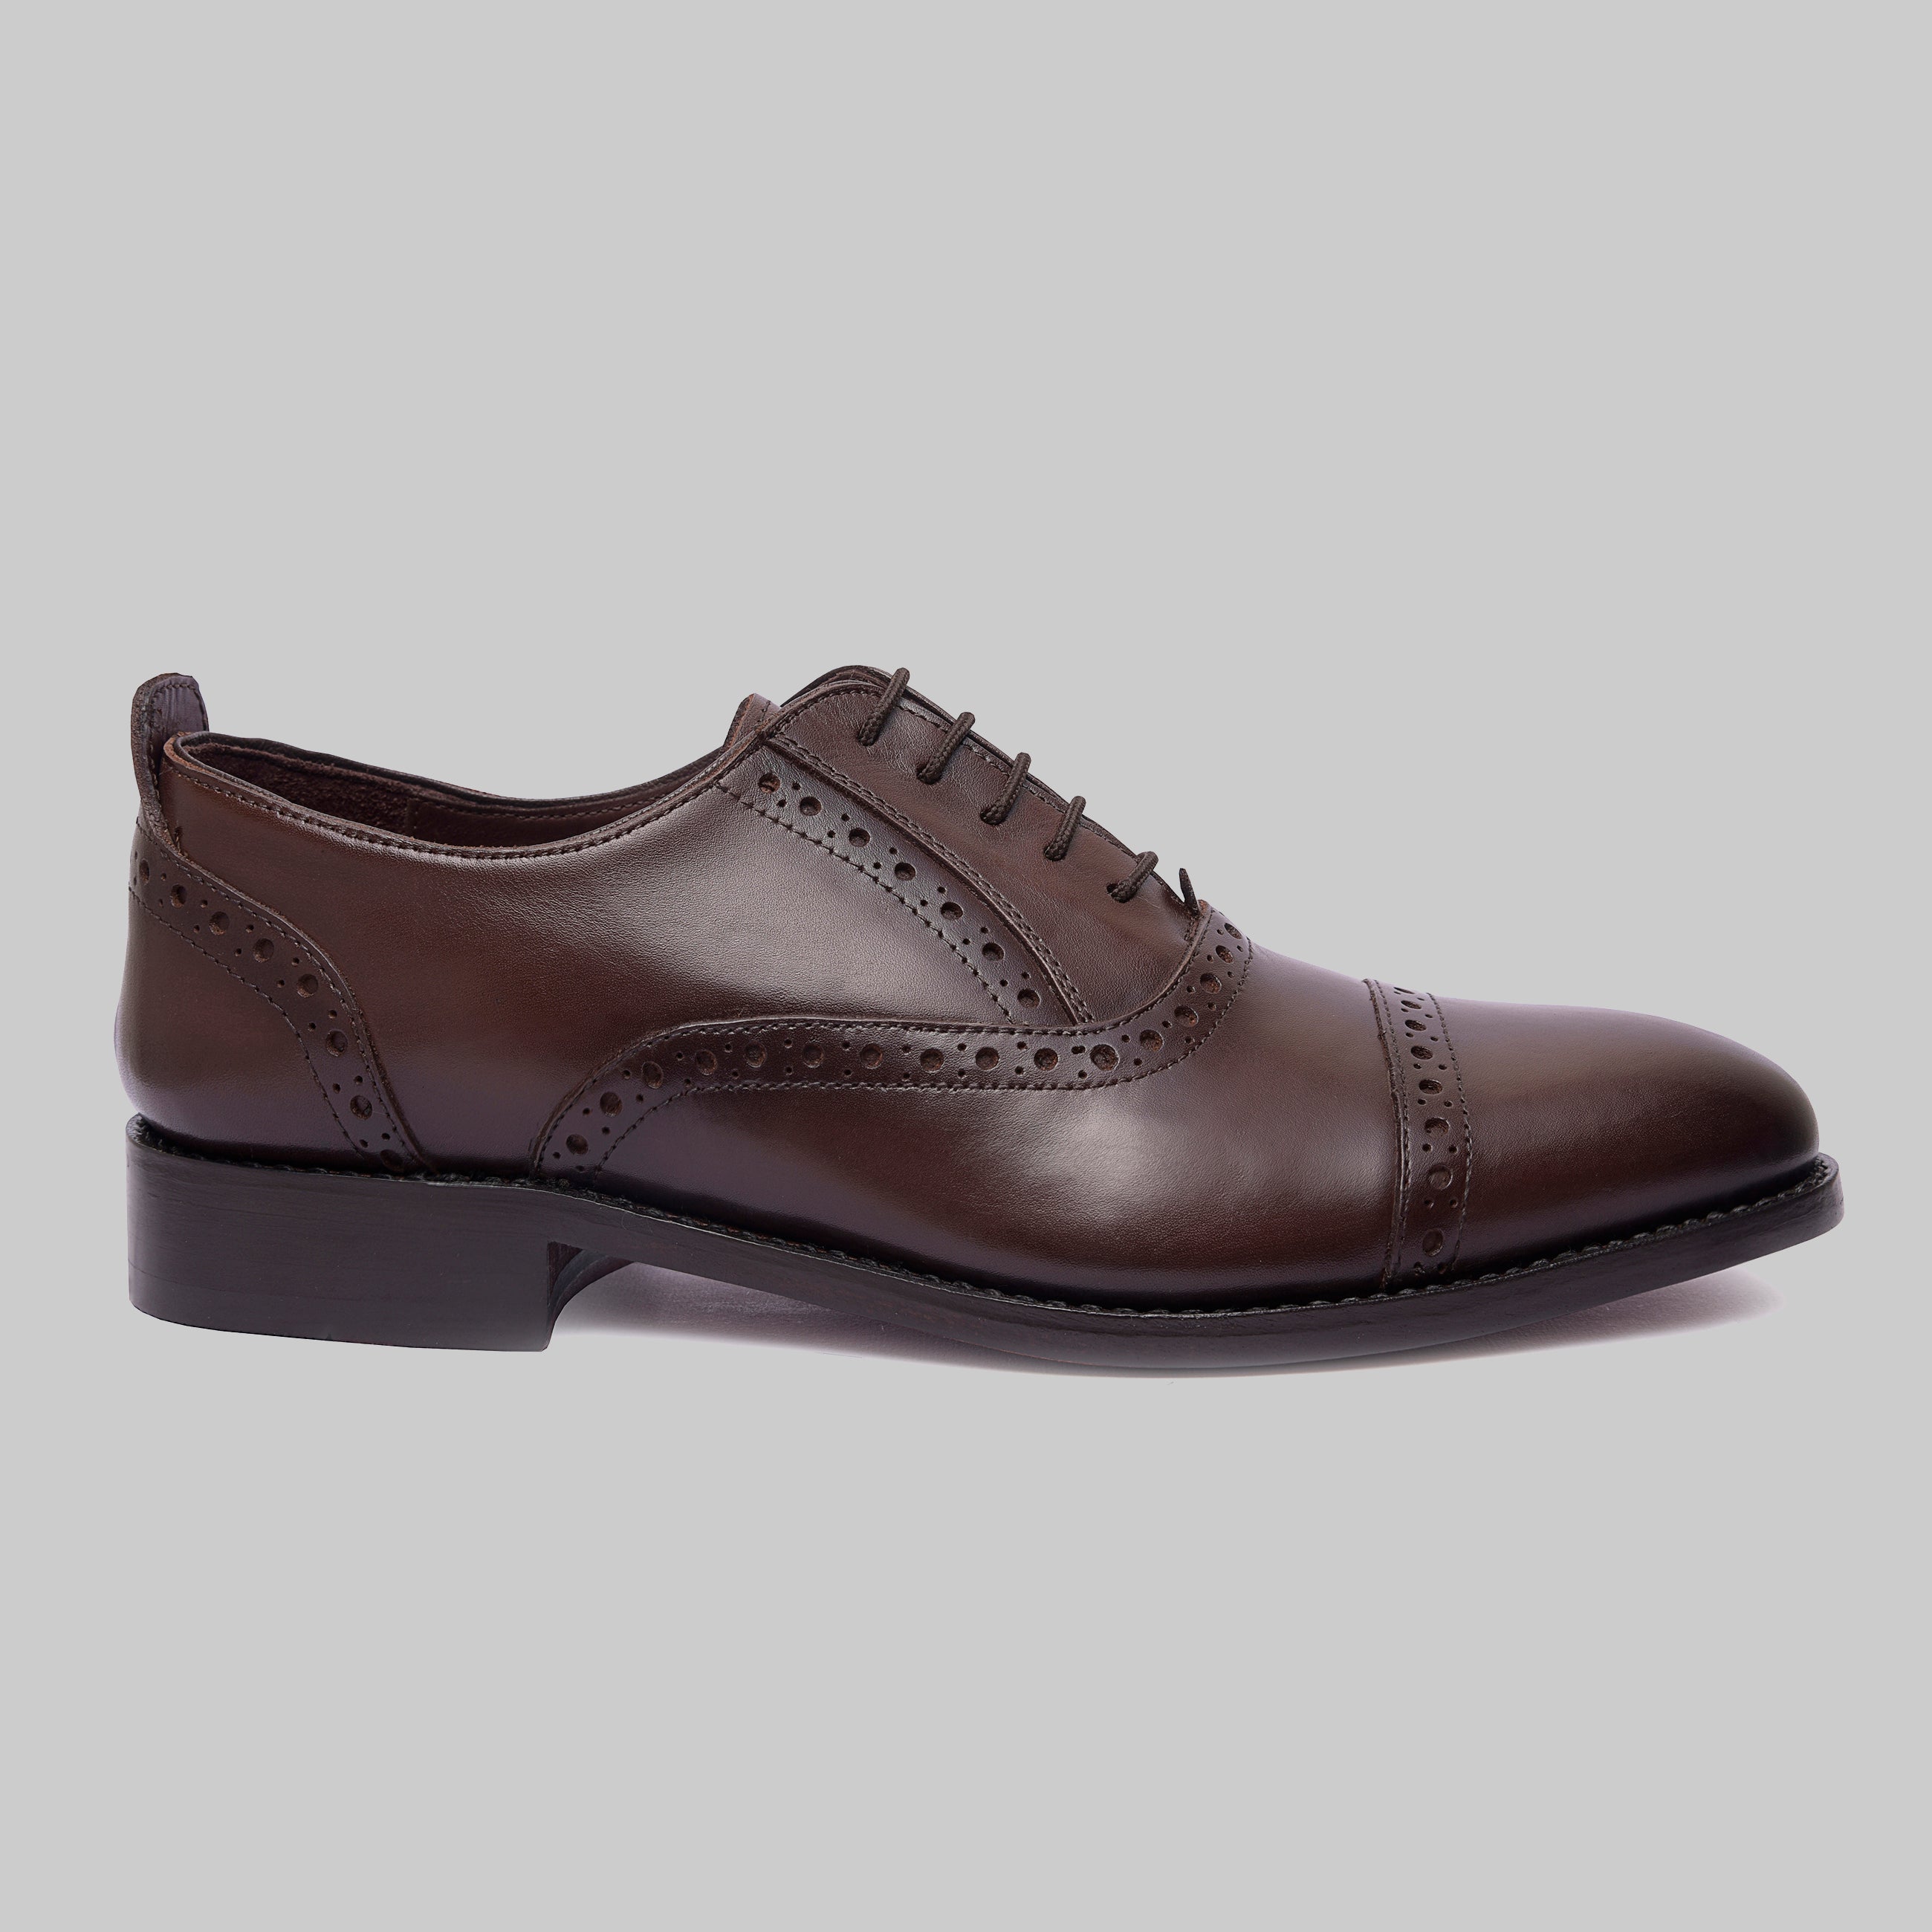 Galton Goodyear Welted Cap Toe Oxford Dress Shoes